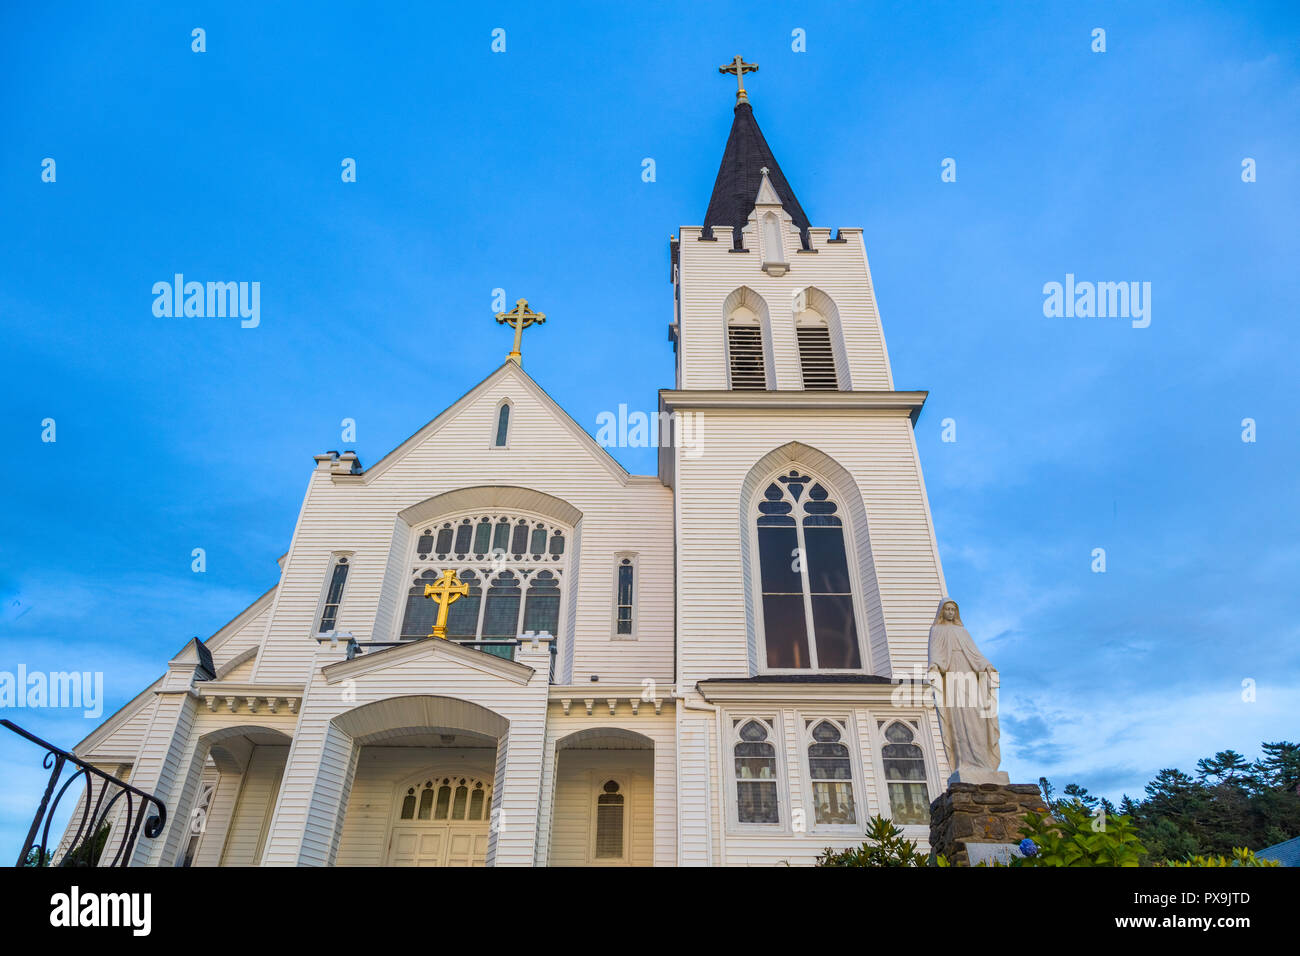 Our Lady Queen of Peace Catholic Church in Boothbay Harbor Maine Stock Photo